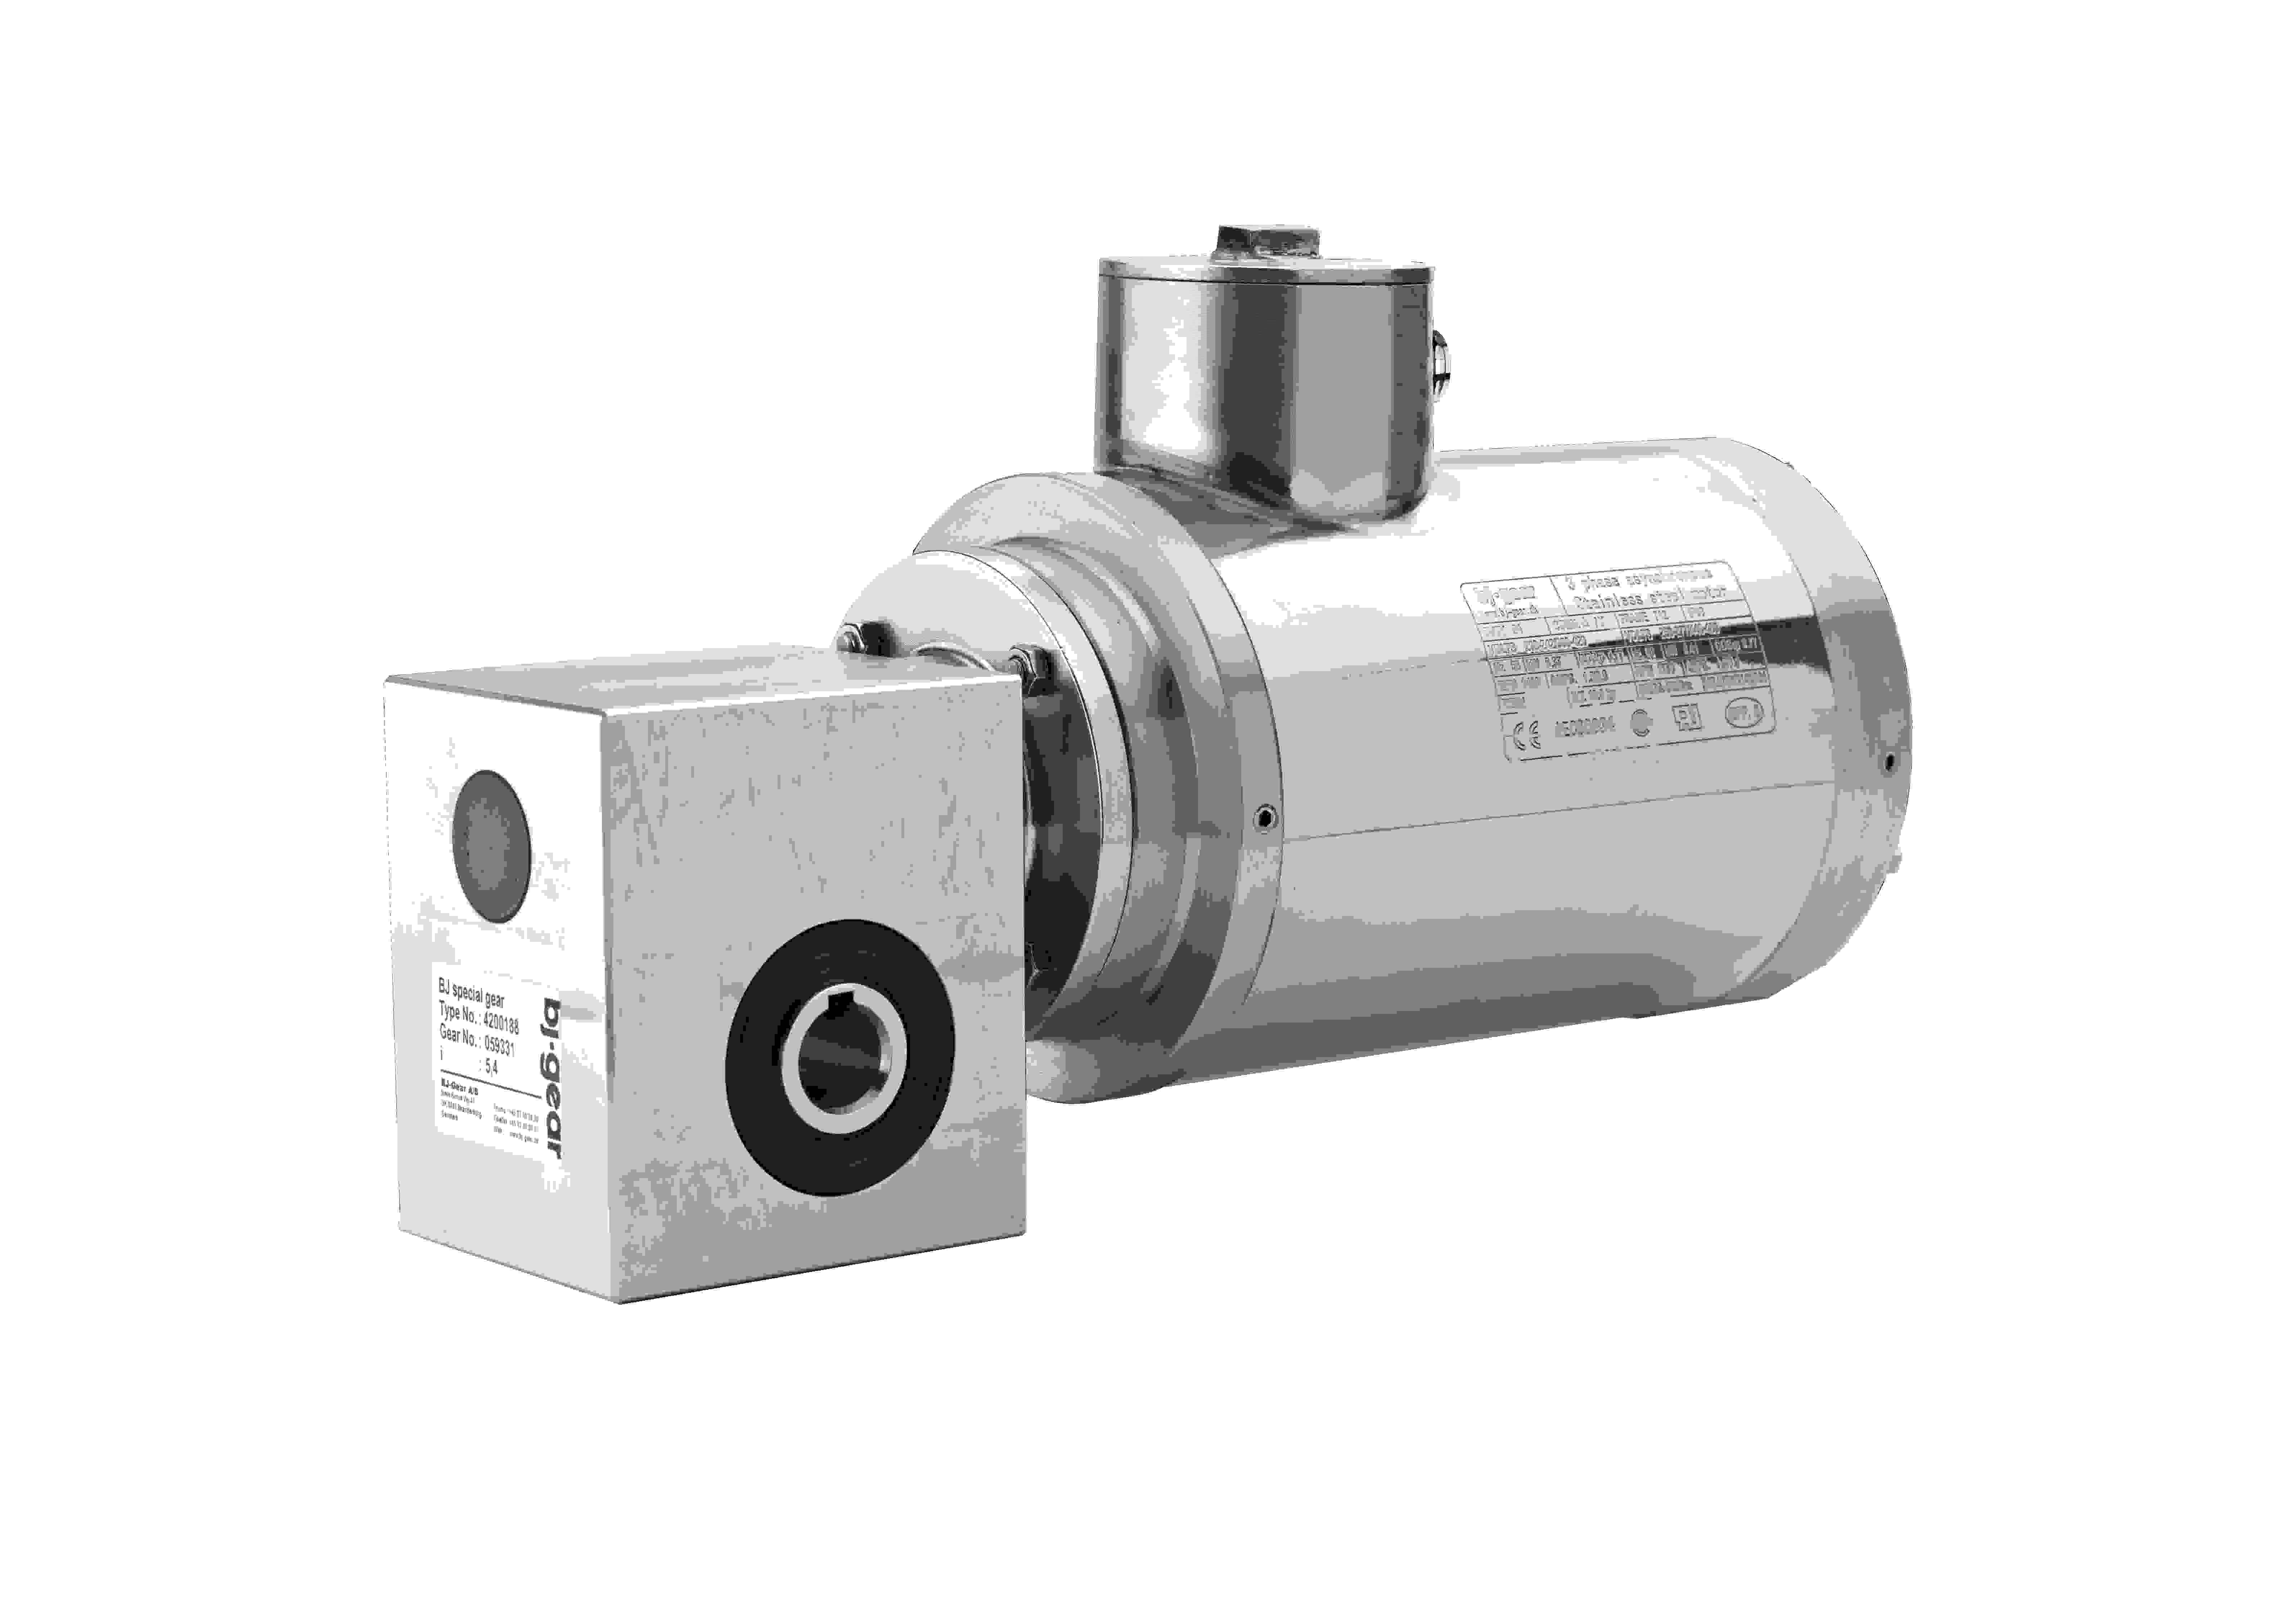 Stainless steel worm gearbox with motor IP65